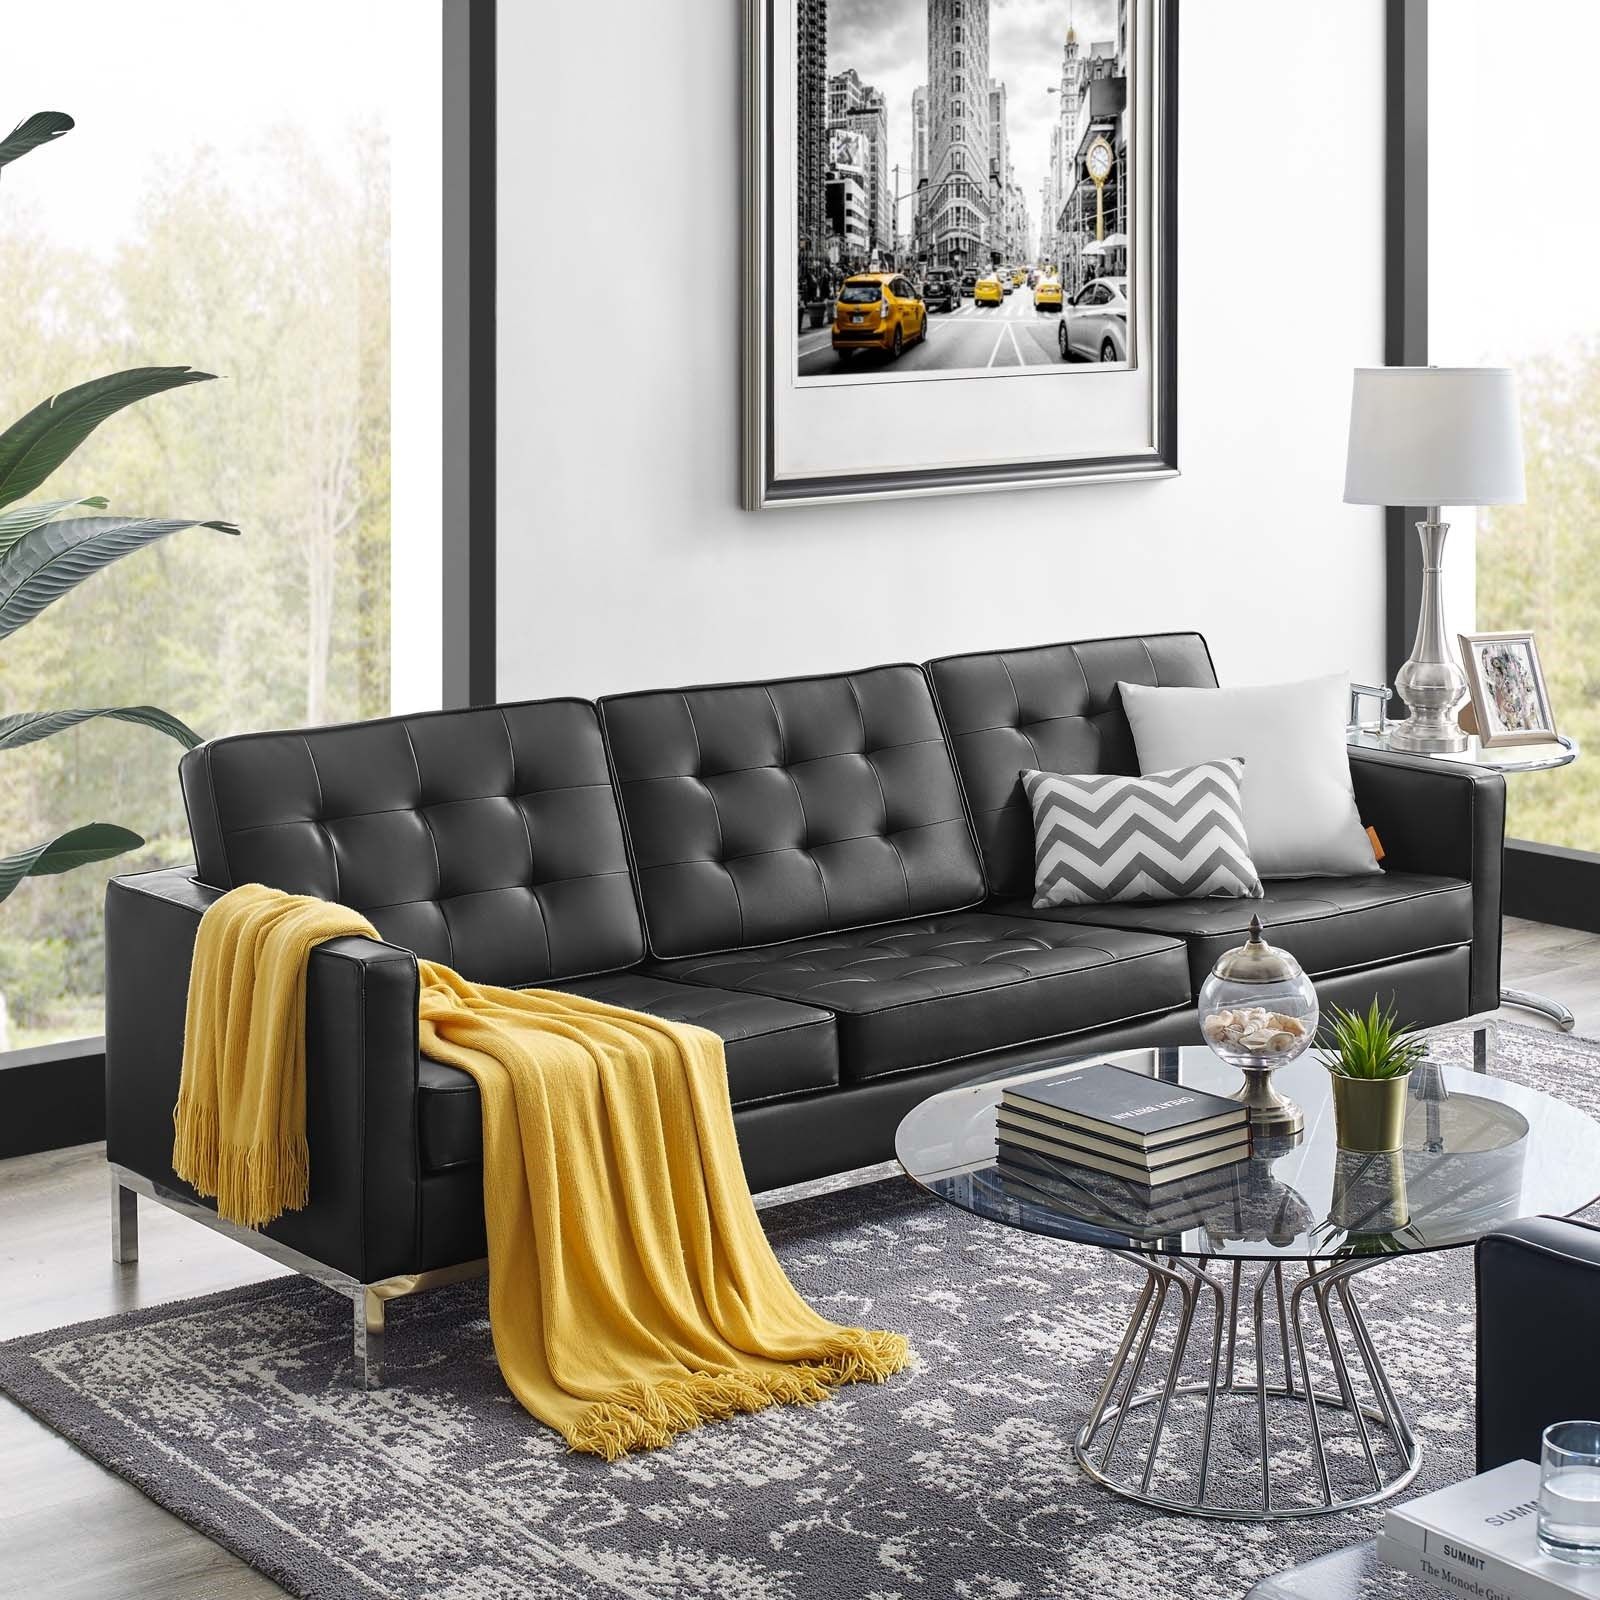 Loft Tufted Upholstered Faux Leather Sofa In Silver Black – Hyme Furniture Within Tufted Upholstered Sofas (View 12 of 15)